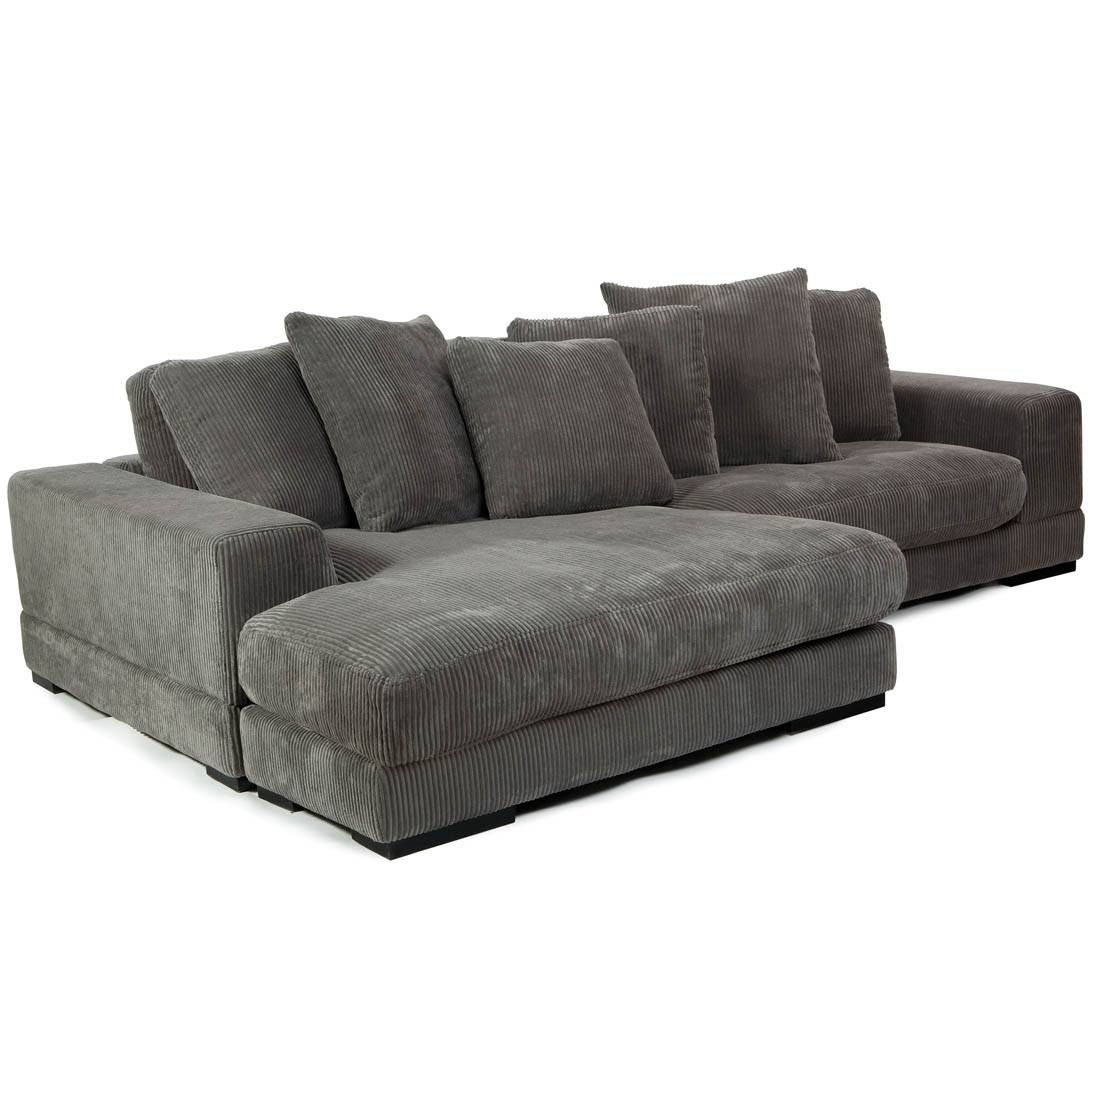 Glamorous Tweed Sectional Sofa 30 In Shabby Chic Sectional Sofa In Shabby Chic Sectional Sofas (Photo 14 of 15)